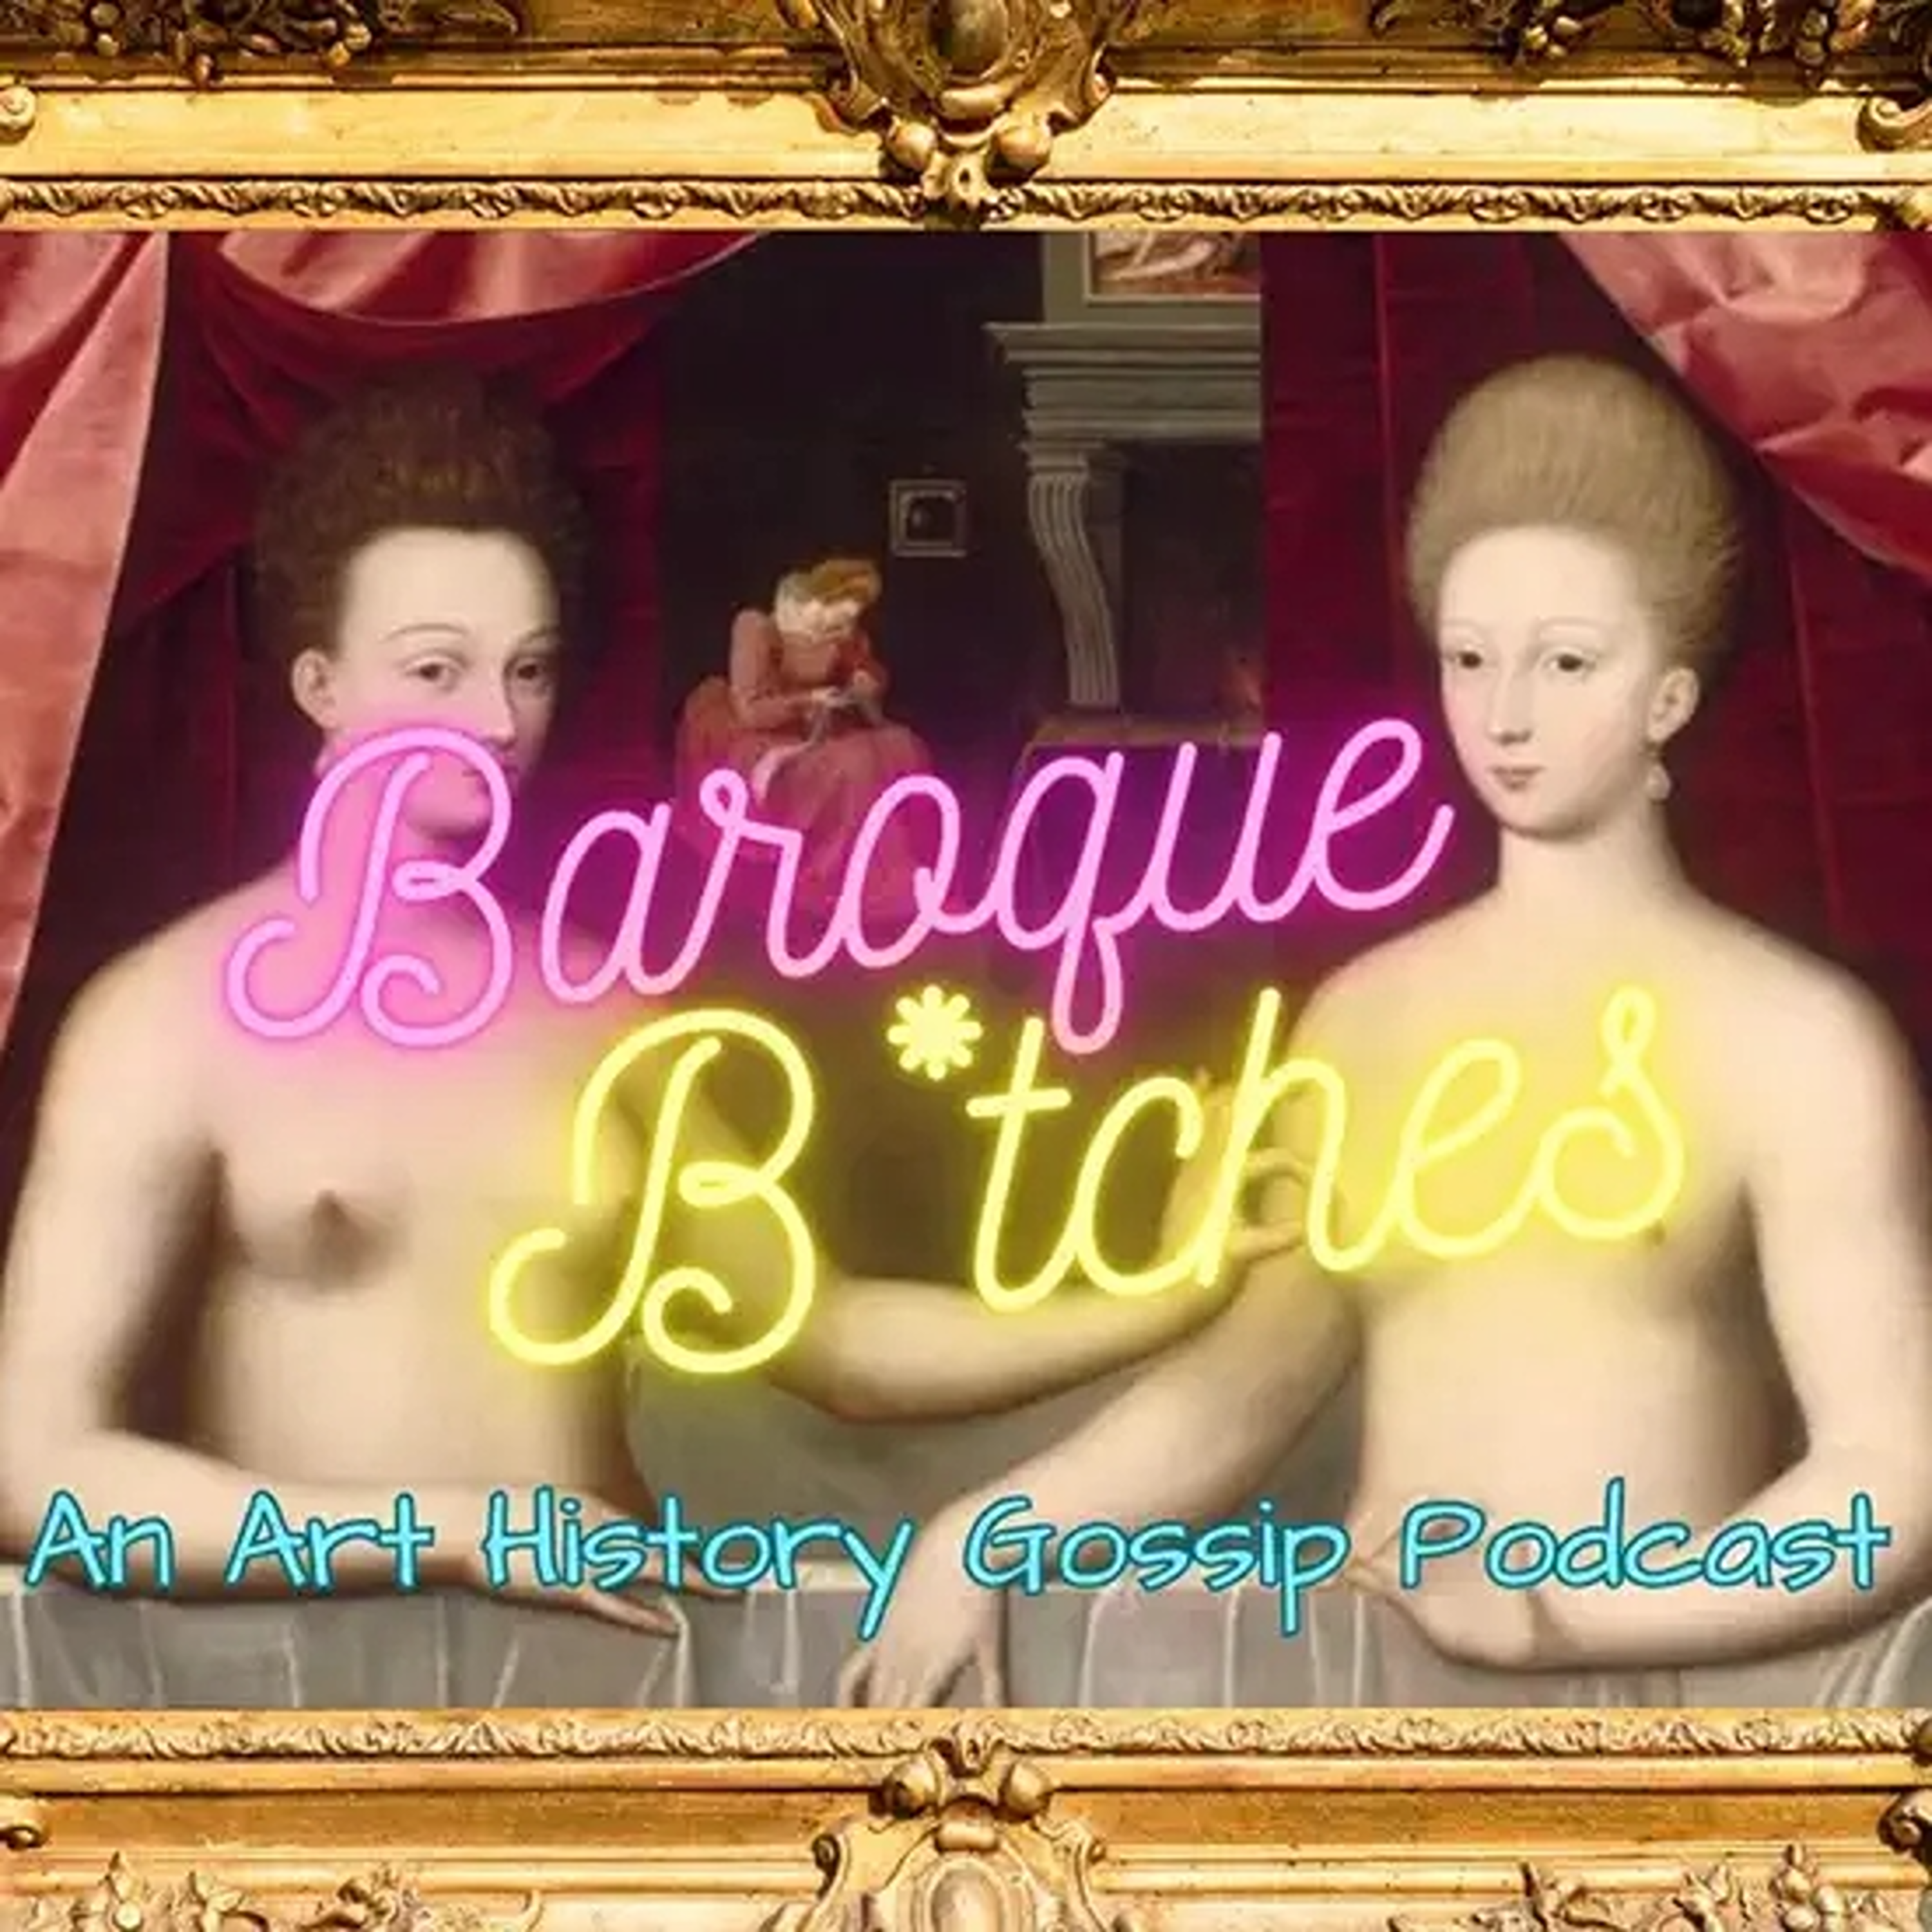 Cheeky Fun with Baroque B*tches Podcast